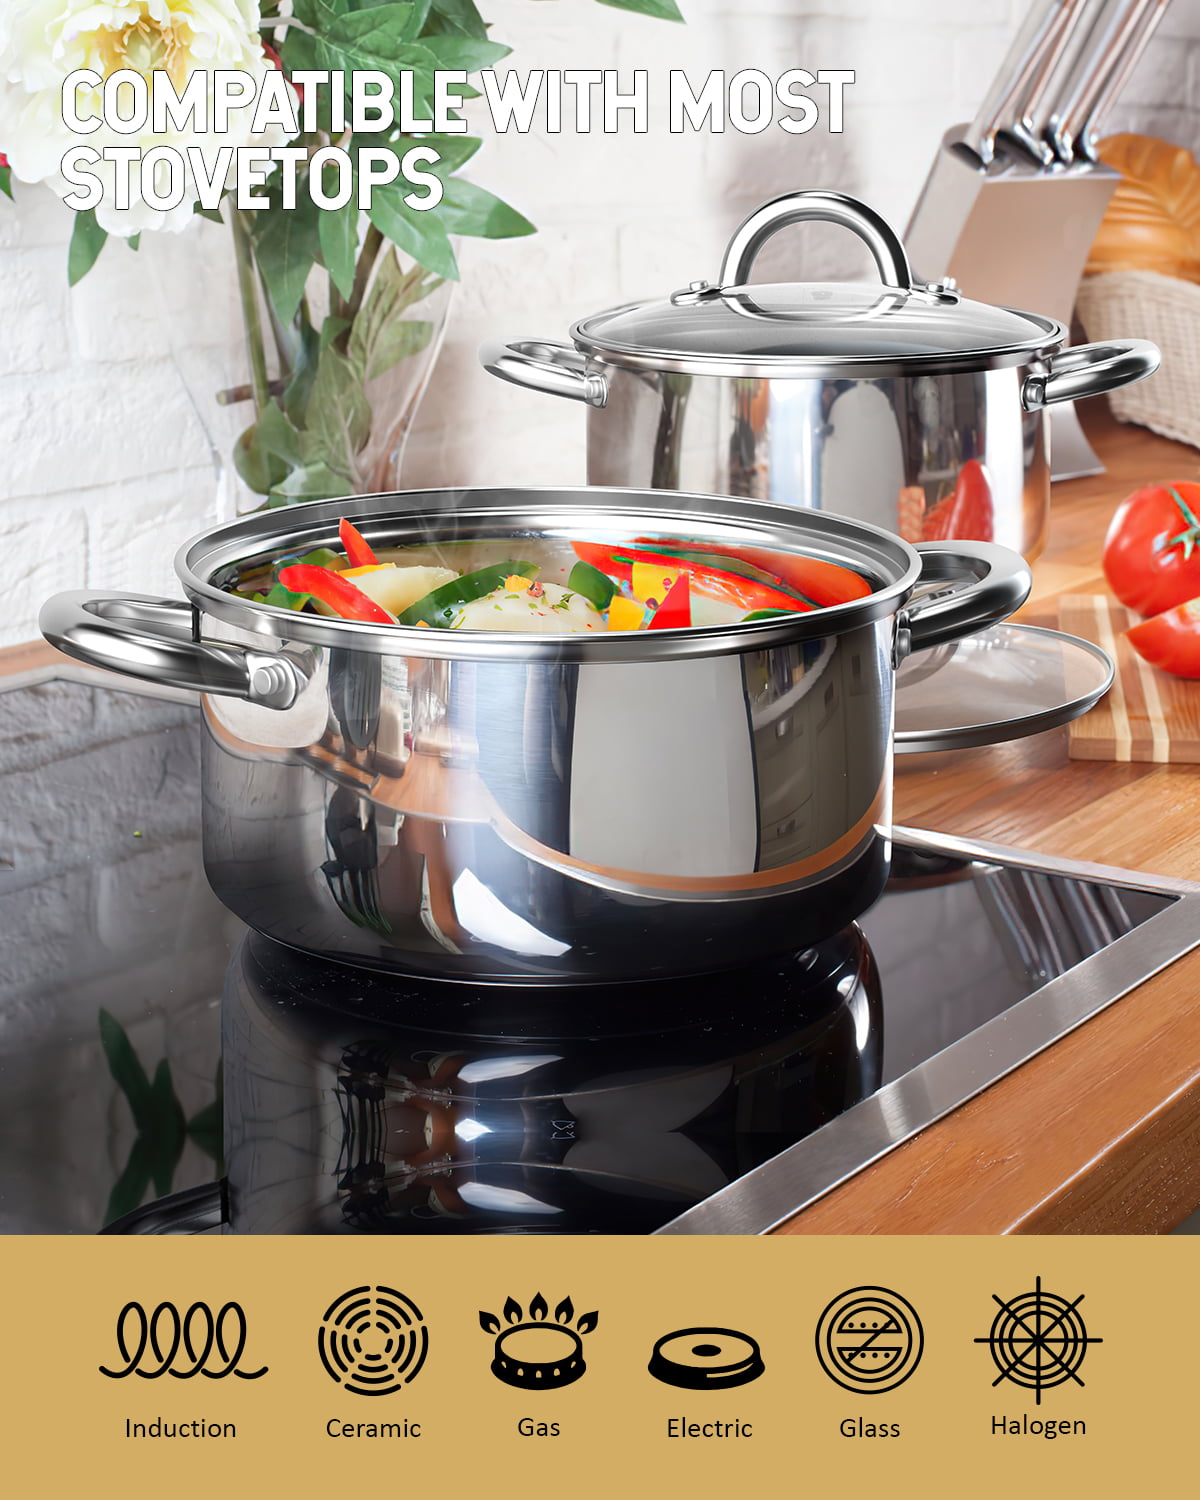 Cook N Home Professional Stainless Steel 12 Quart Stockpot Sauce Pot  Induction Pot With Lid, 12 quart - Kroger